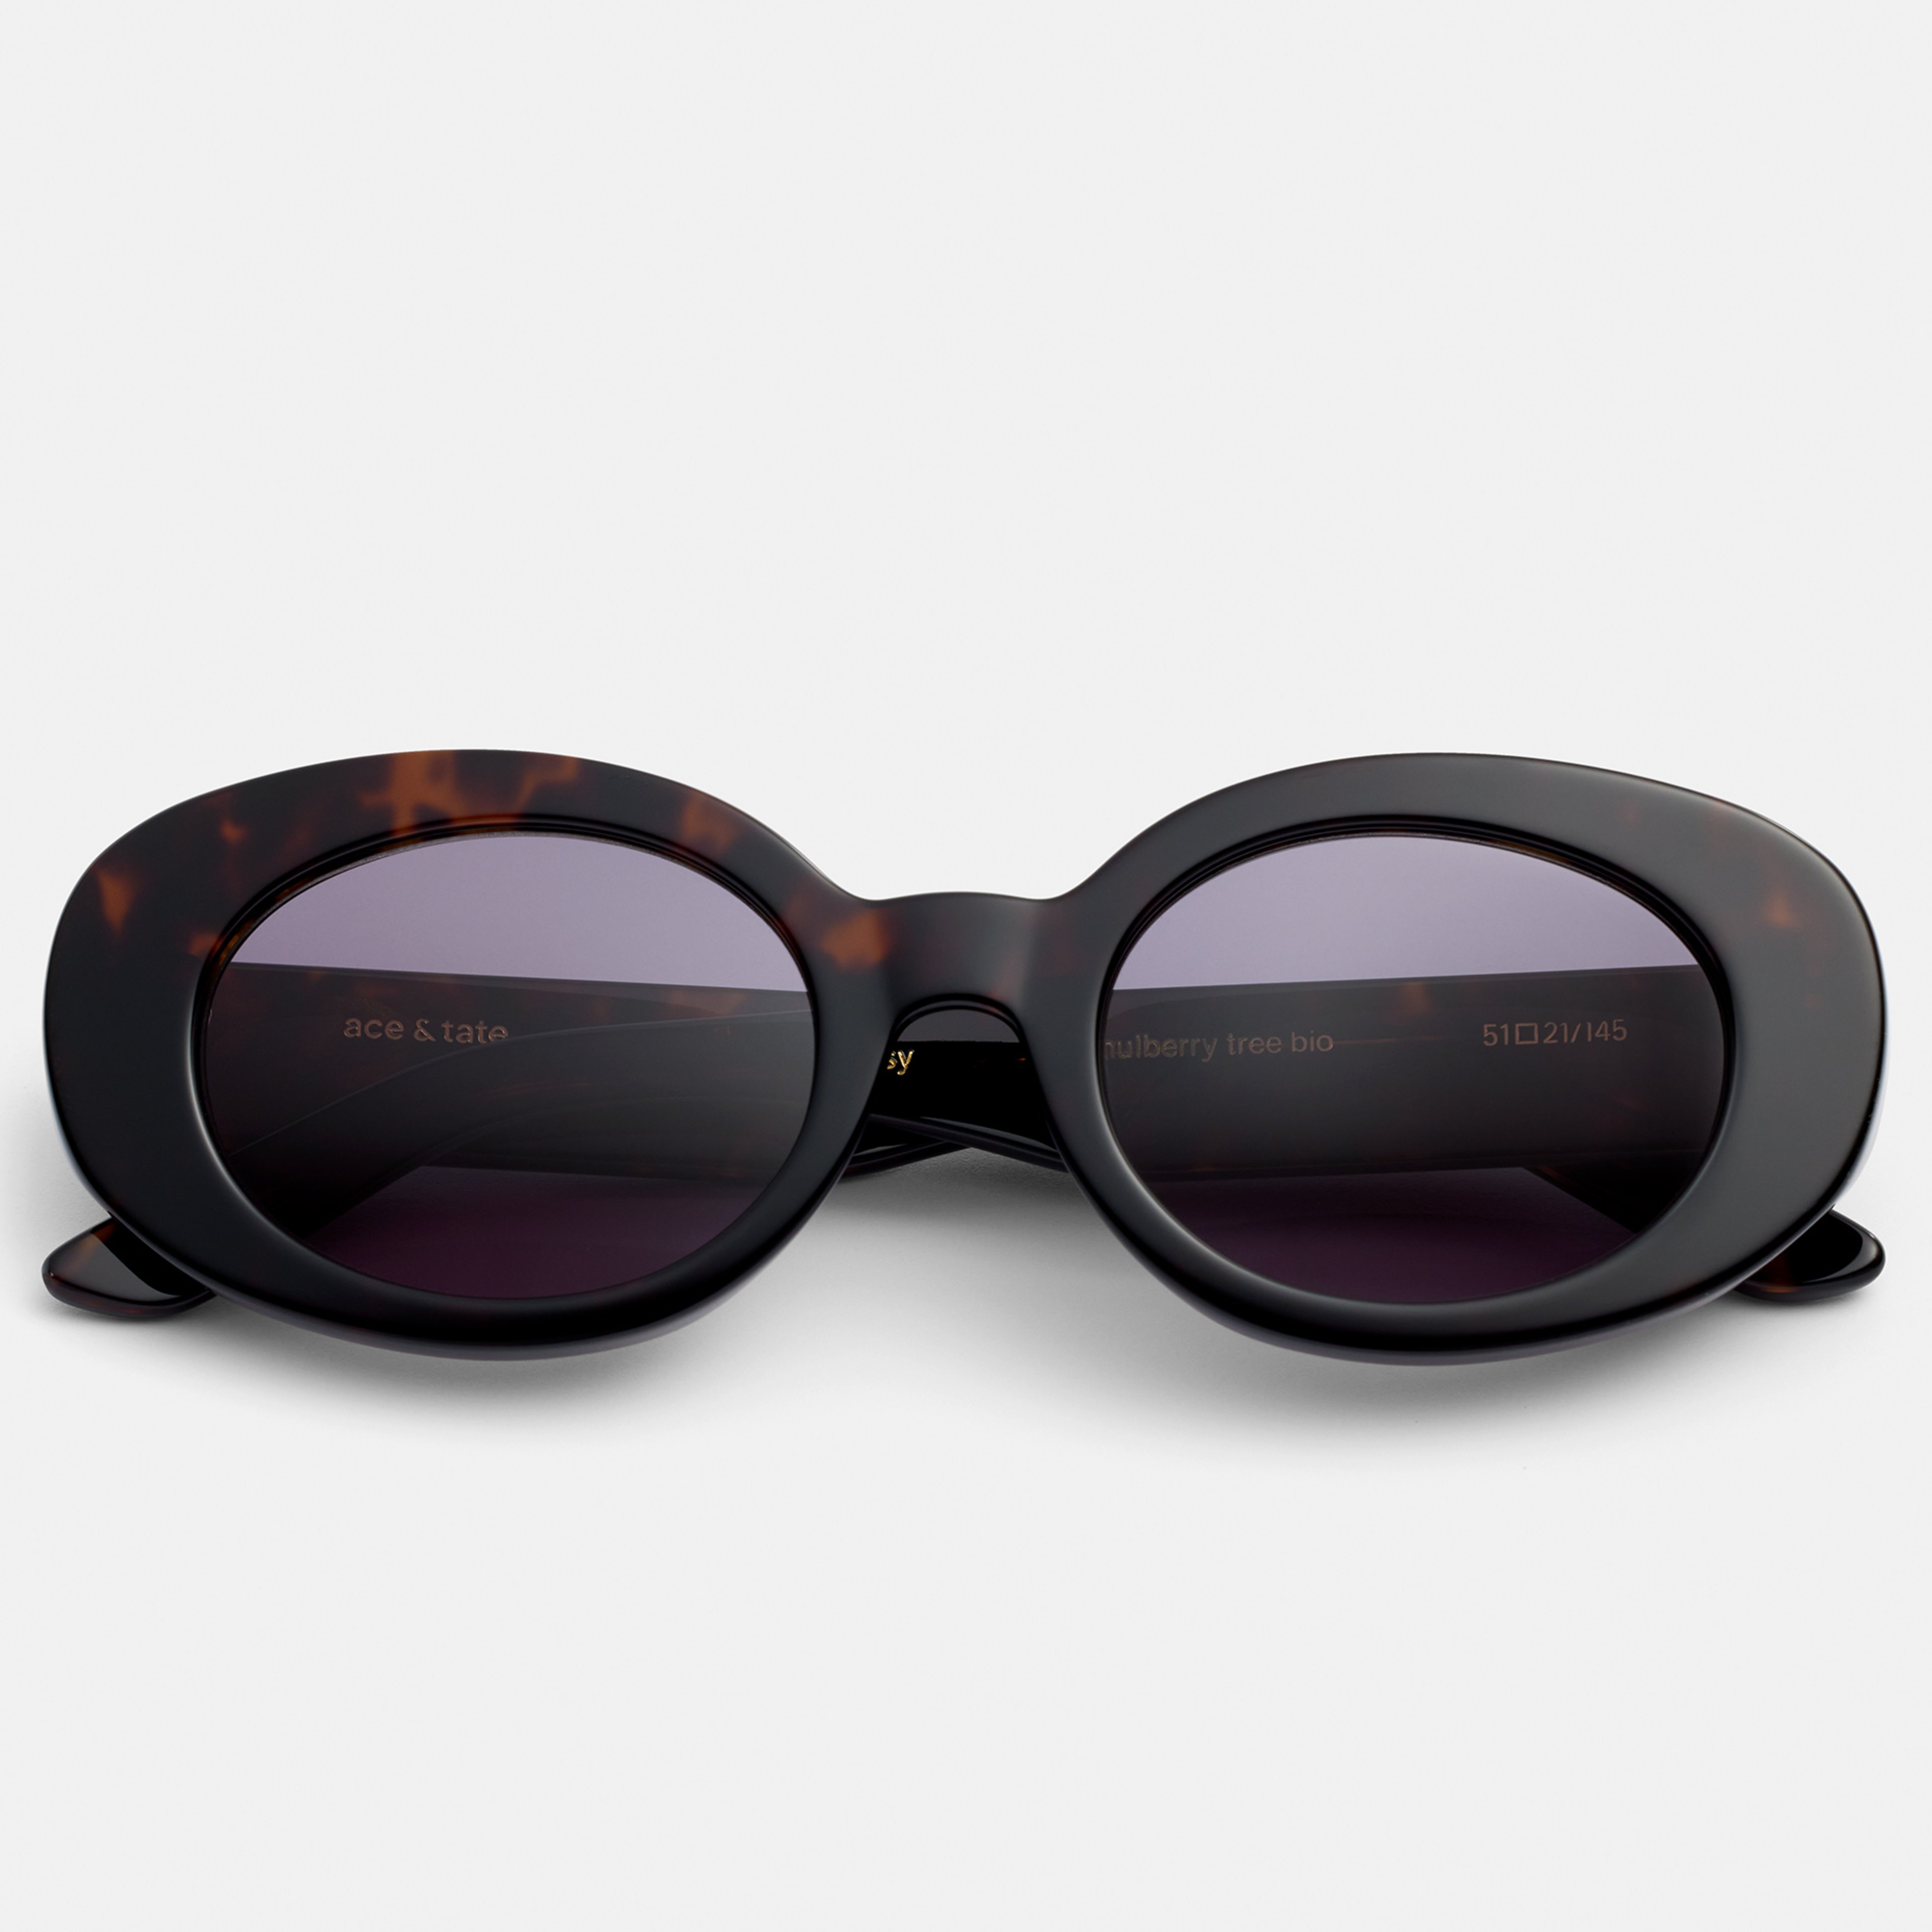 Ace & Tate Solaires | oval Bio-acétate in Marron